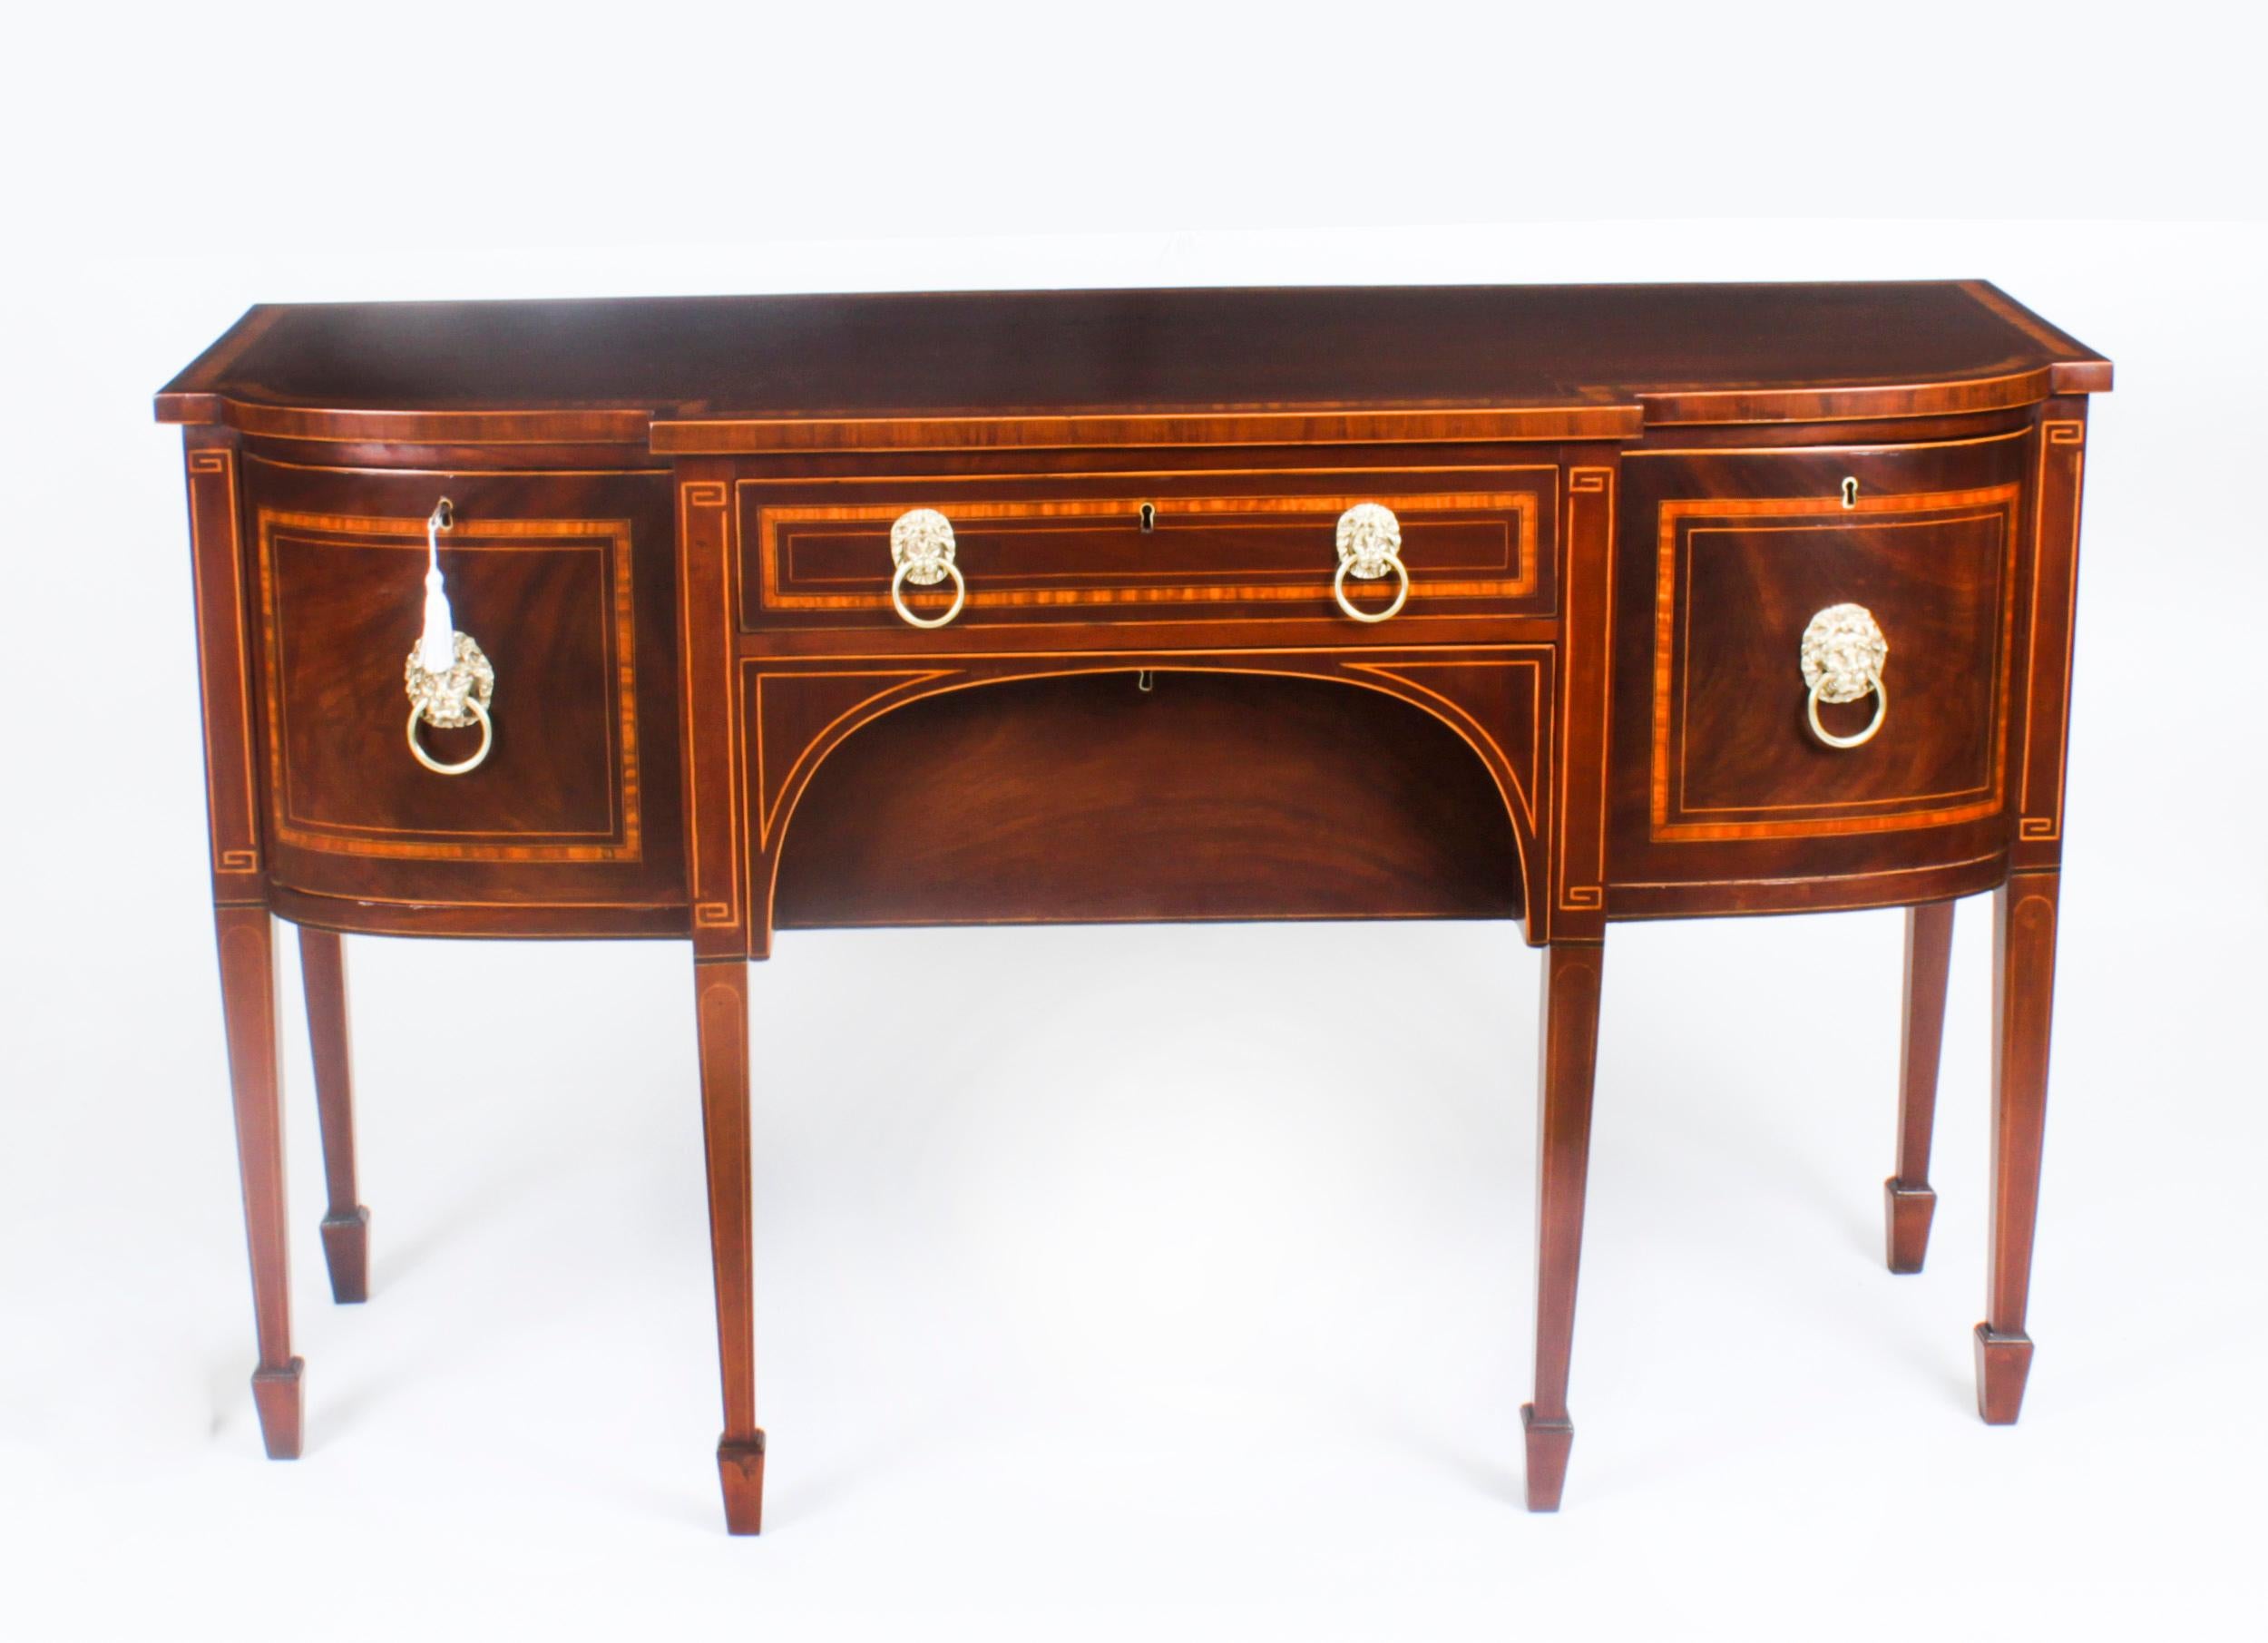 This is a superb antique George III inlaid flame mahogany and crossbanded bowfront sideboard, circa 1780 in date.
 
The sideboard is cross banded in satinwood with boxwood inlay and has a central frieze drawer above a deep drawer. There is a shaped